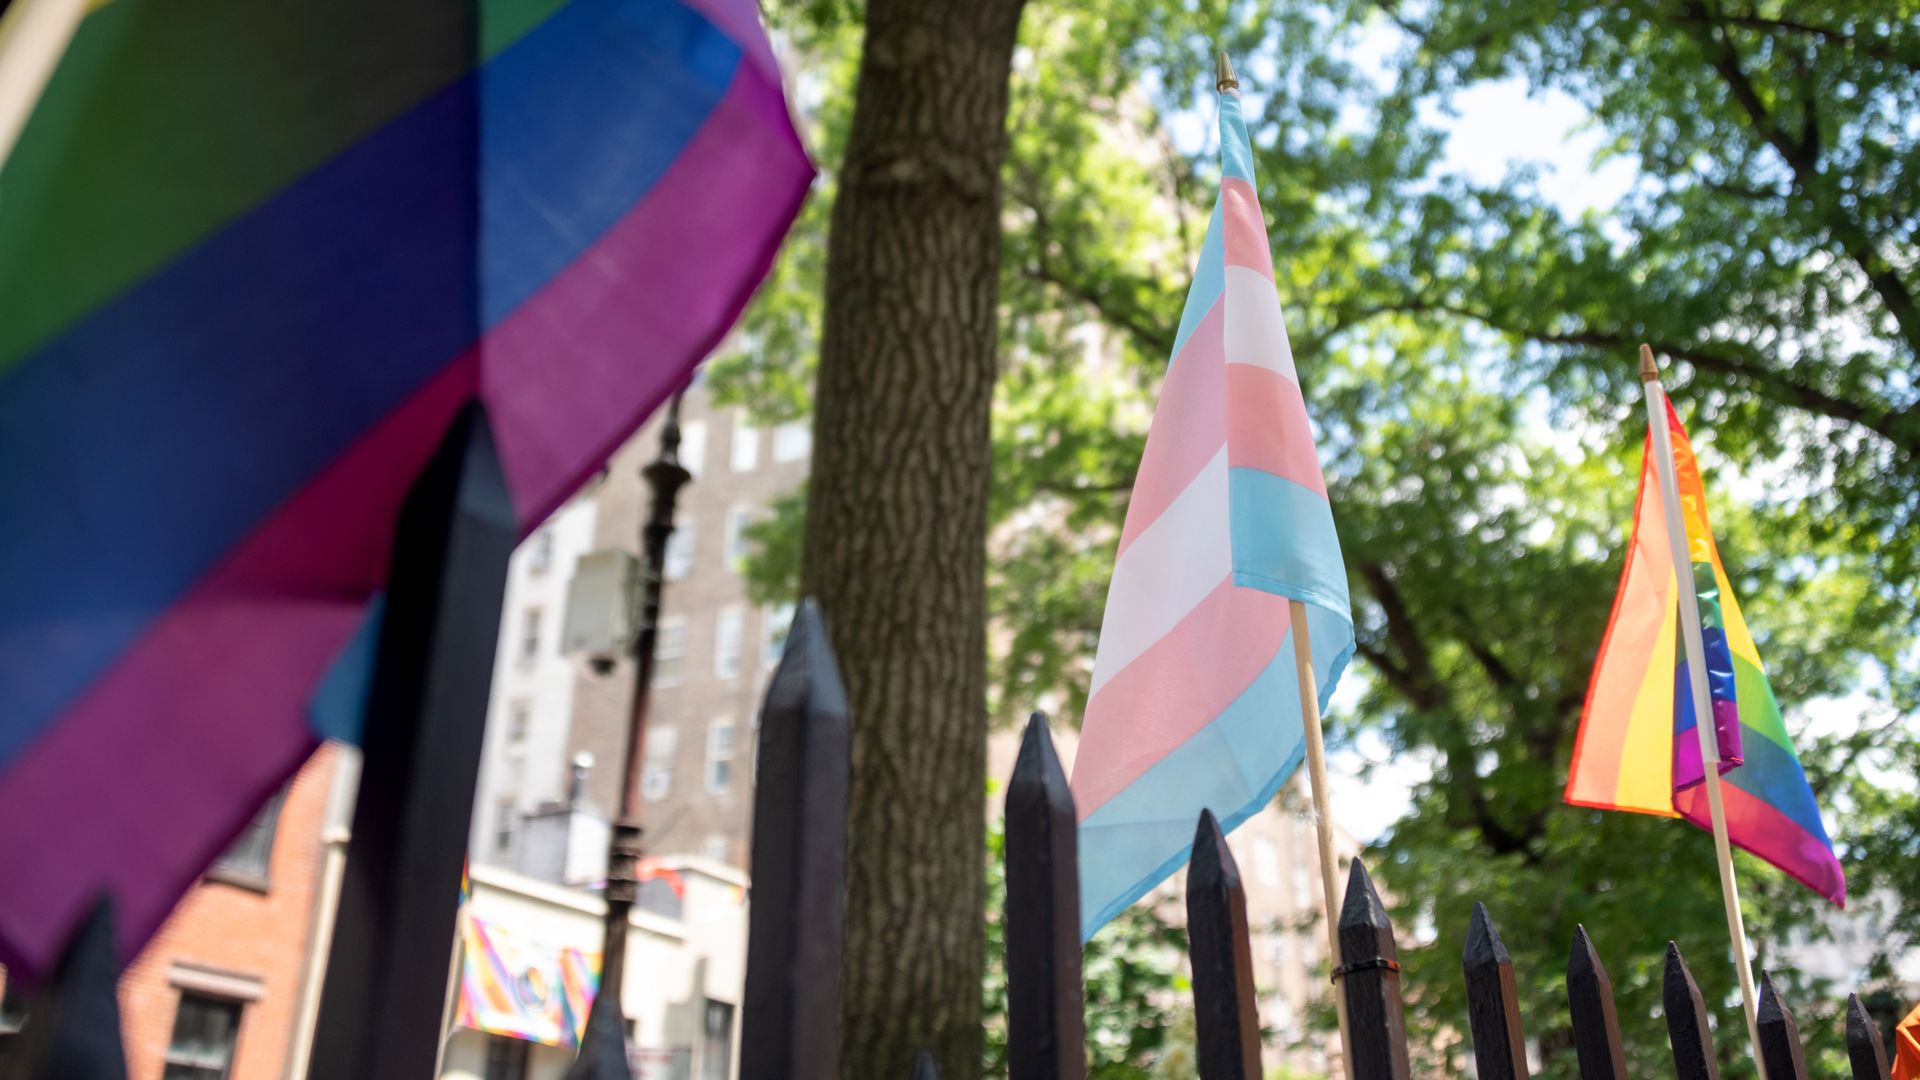 Photo of a trans flag perched on a fence between two rainbow flags at an outdoor park